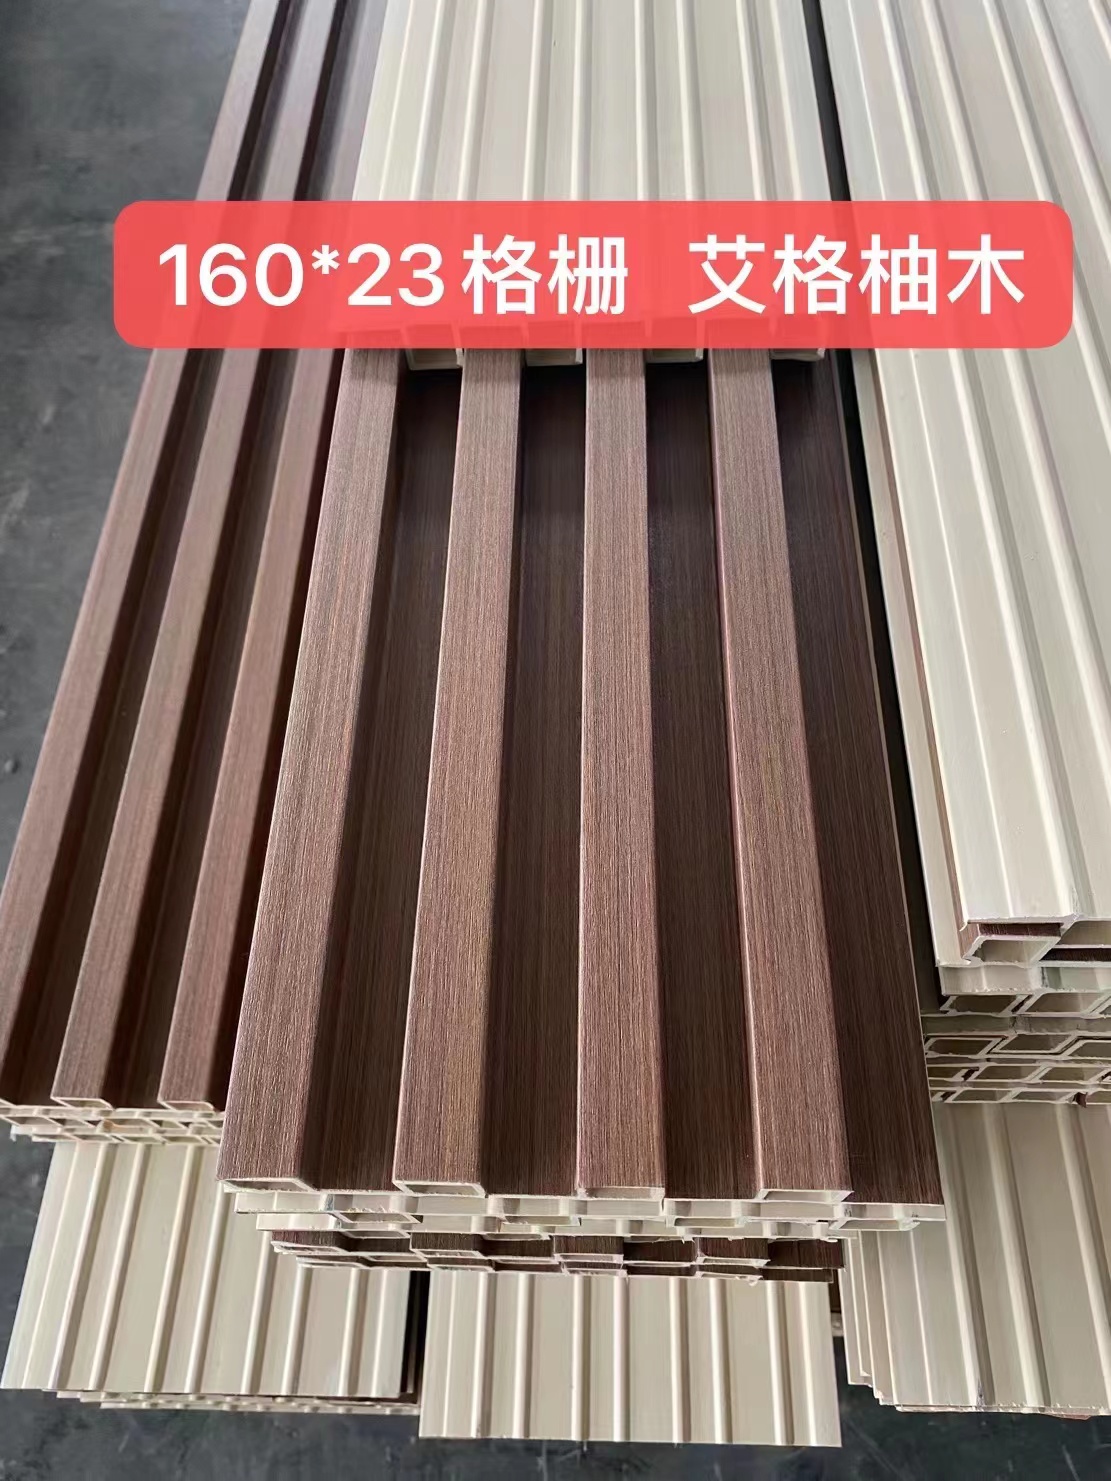 Indoor Wood Plastic Composite Cladding Fluted Wooden Grain PVC Wpc Interior Wall Panel Designs for Decoration